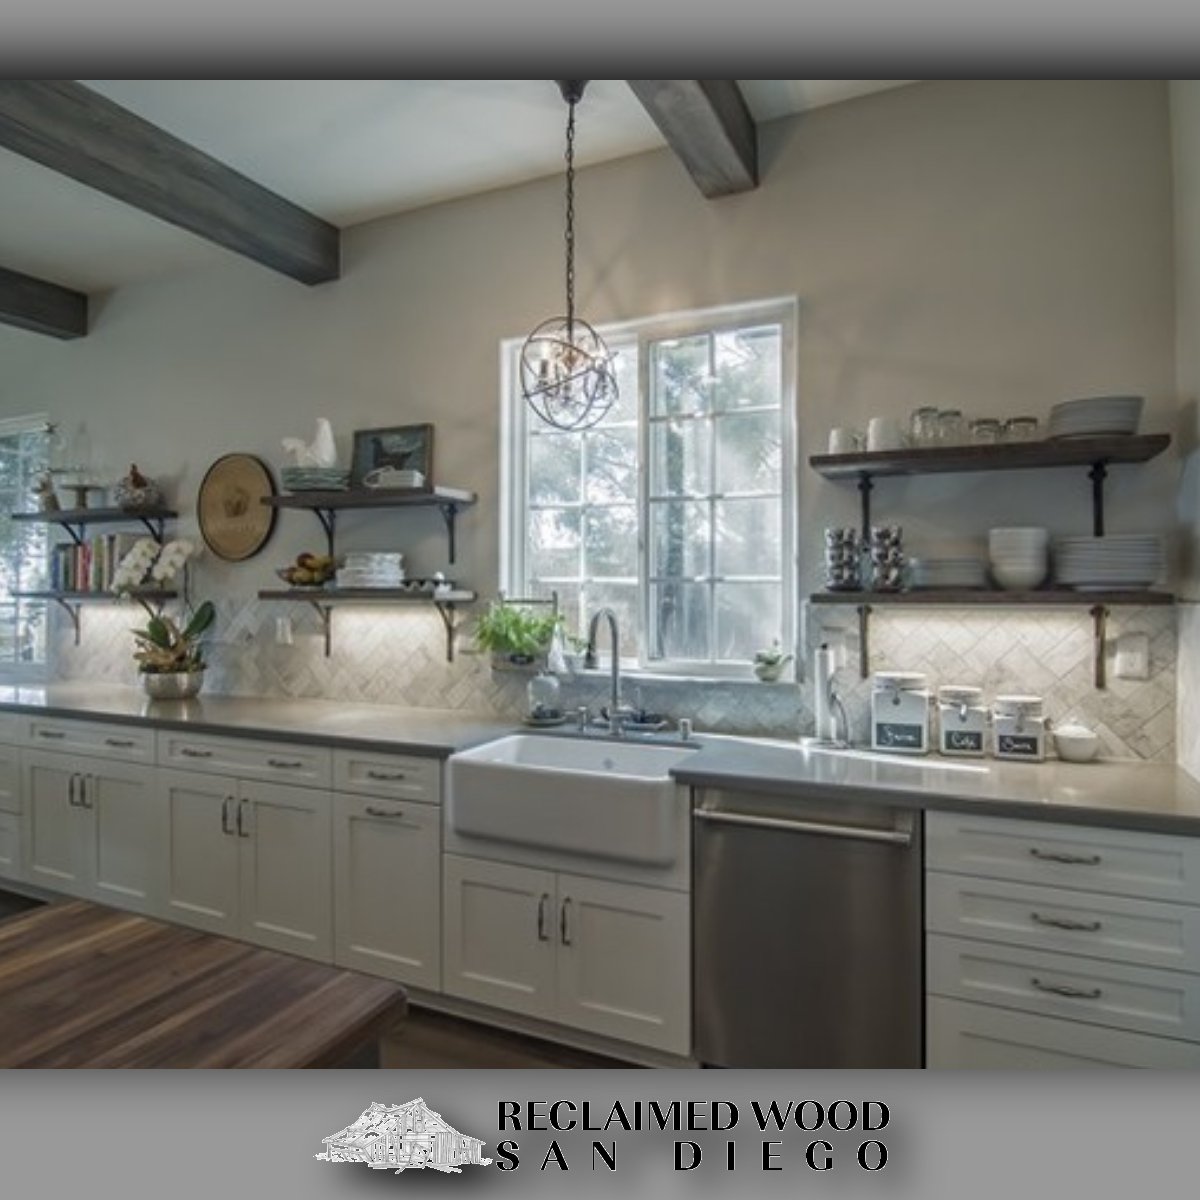 Tying this project together with gray wood. #reclaimedwood #reclaimedwoodsandiego #sandiego #homedecor #rusticshelving #kitchen #rusticdesign #recycling #upcycling #farmhousekitchen #boxbeams #beams #exposedbeams